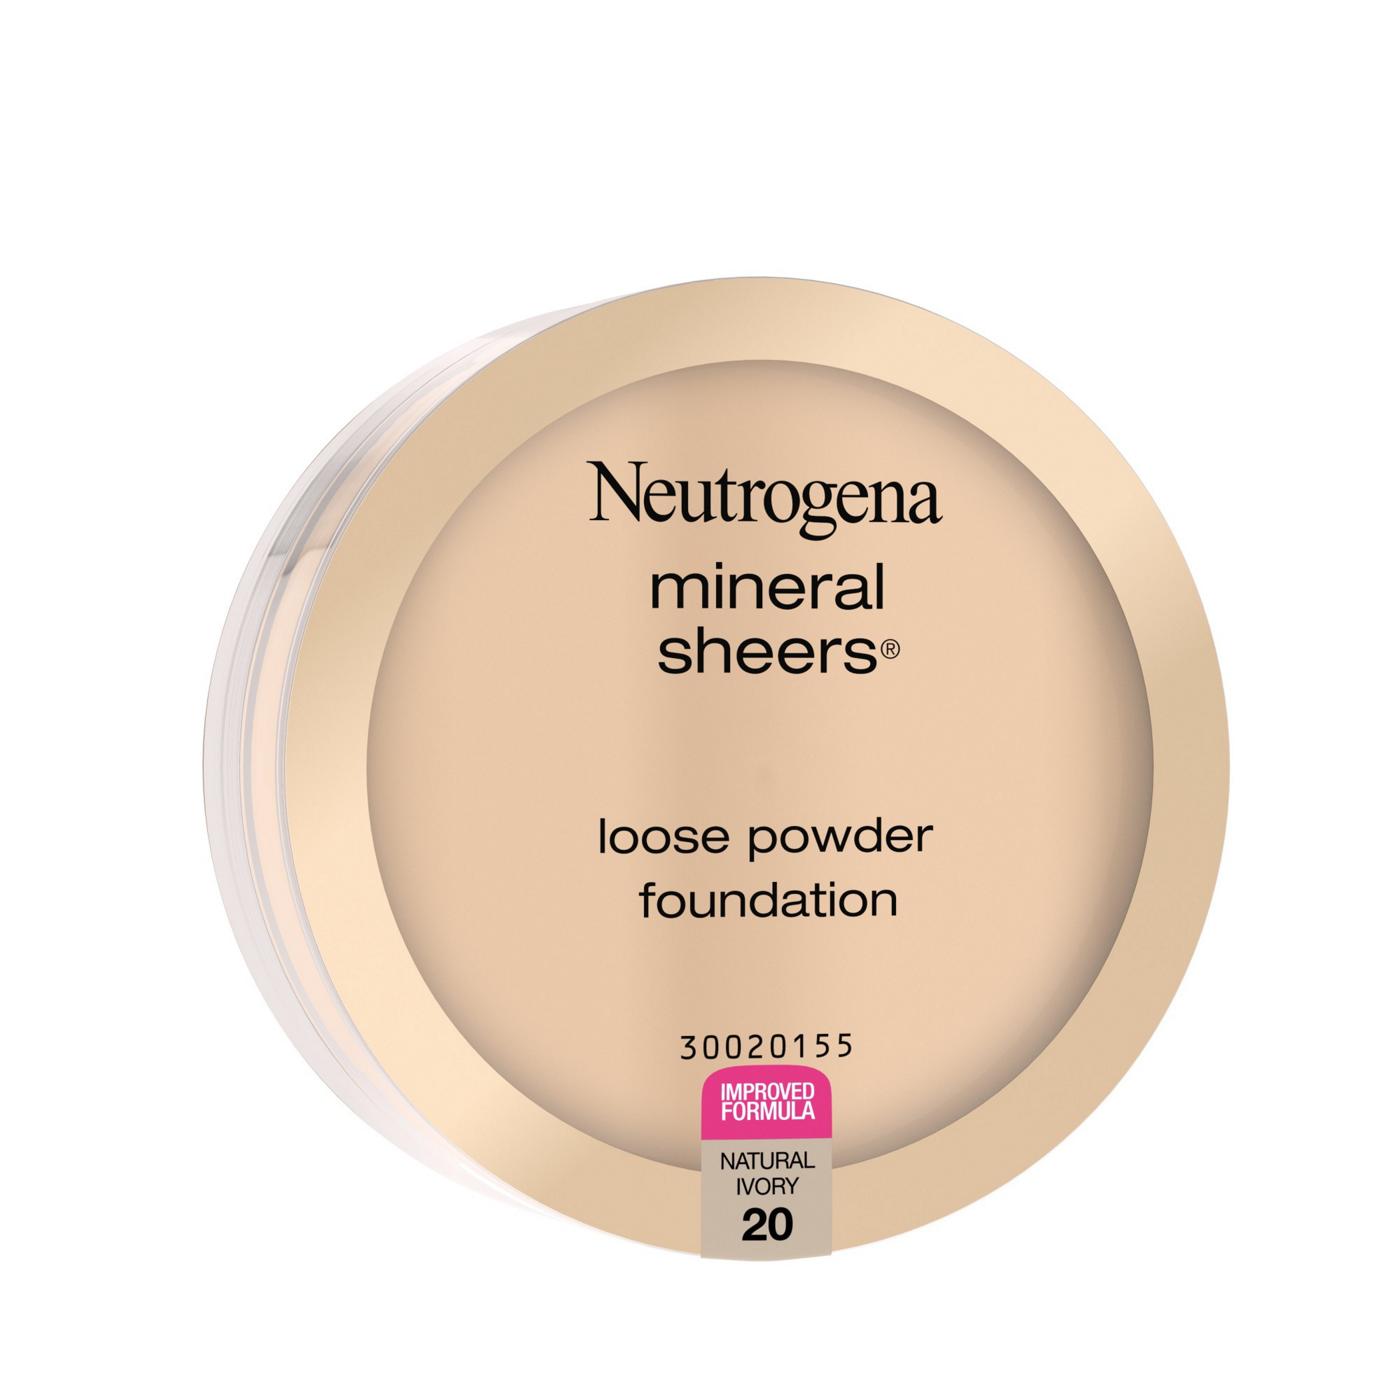 Neutrogena Mineral Sheers Loose Powder Foundation 20 Natural Ivory; image 5 of 6